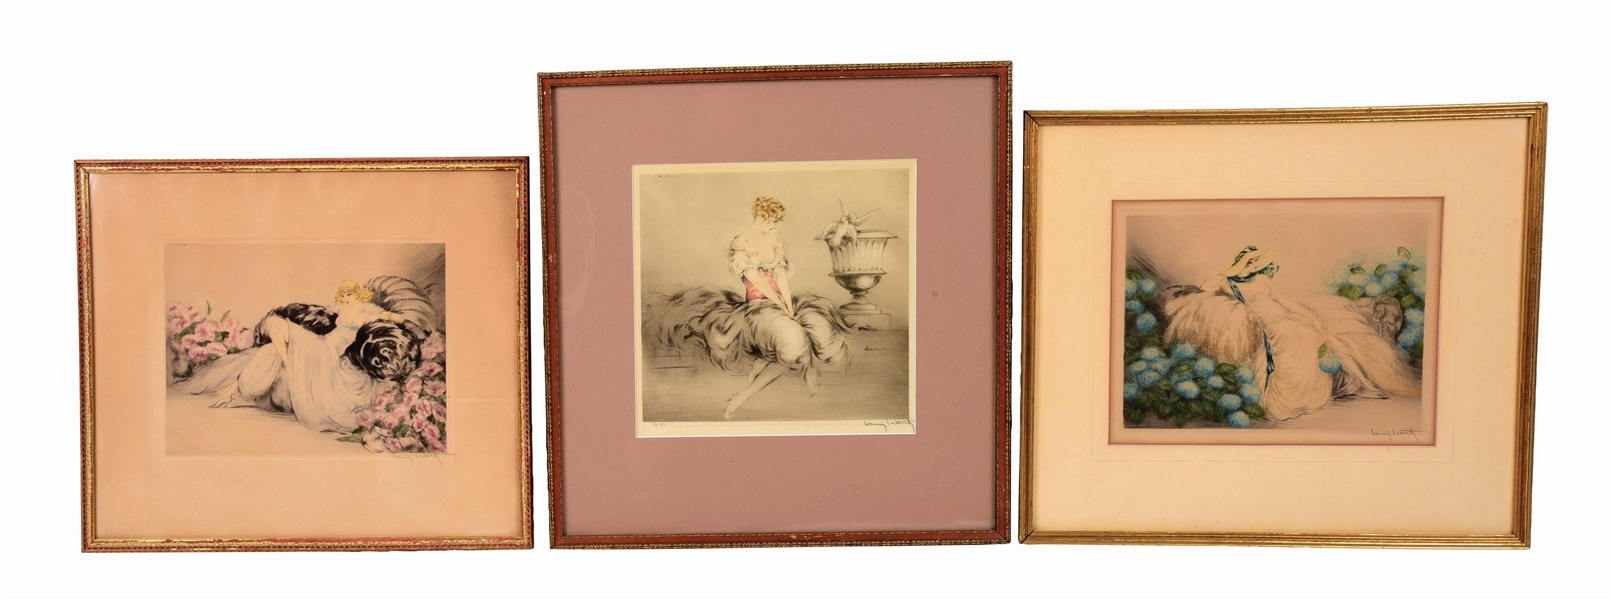 LOUIS ICART (FRENCH, 1888-1950) LOT OF THREE SIGNED LITHOGRAPHS